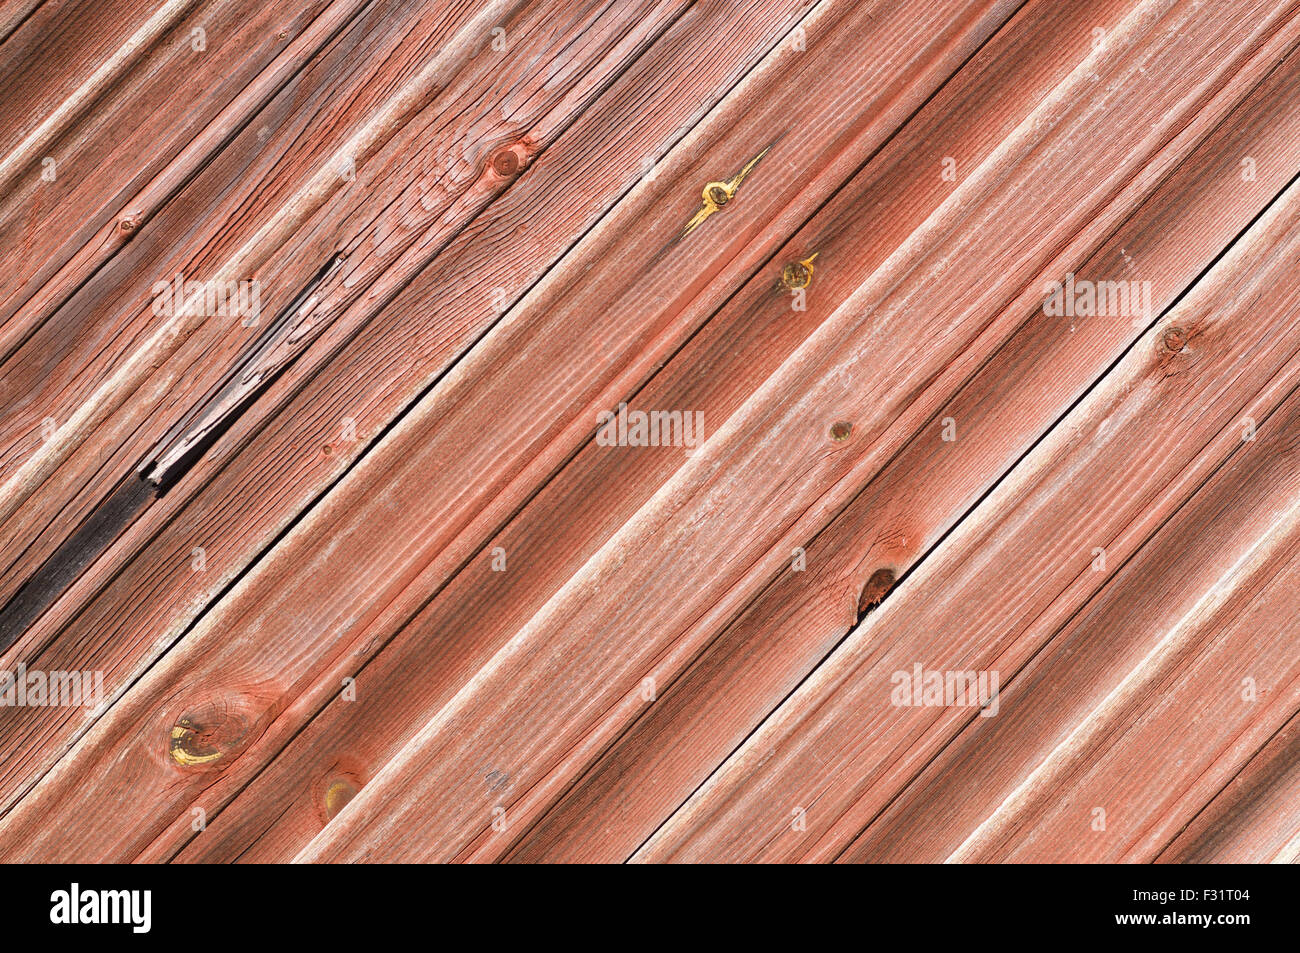 Wooden plank wall painted red, diagonal pattern Stock Photo